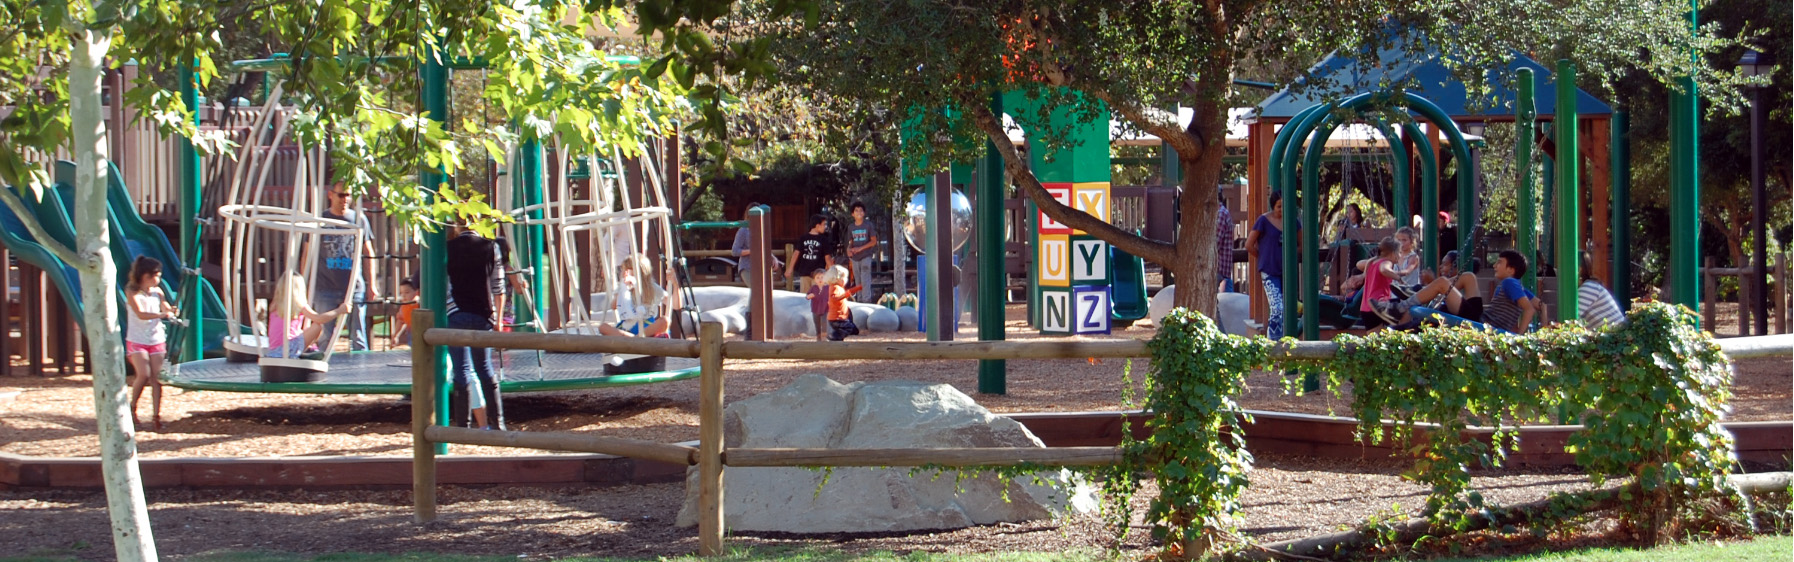 kids playing at a park 